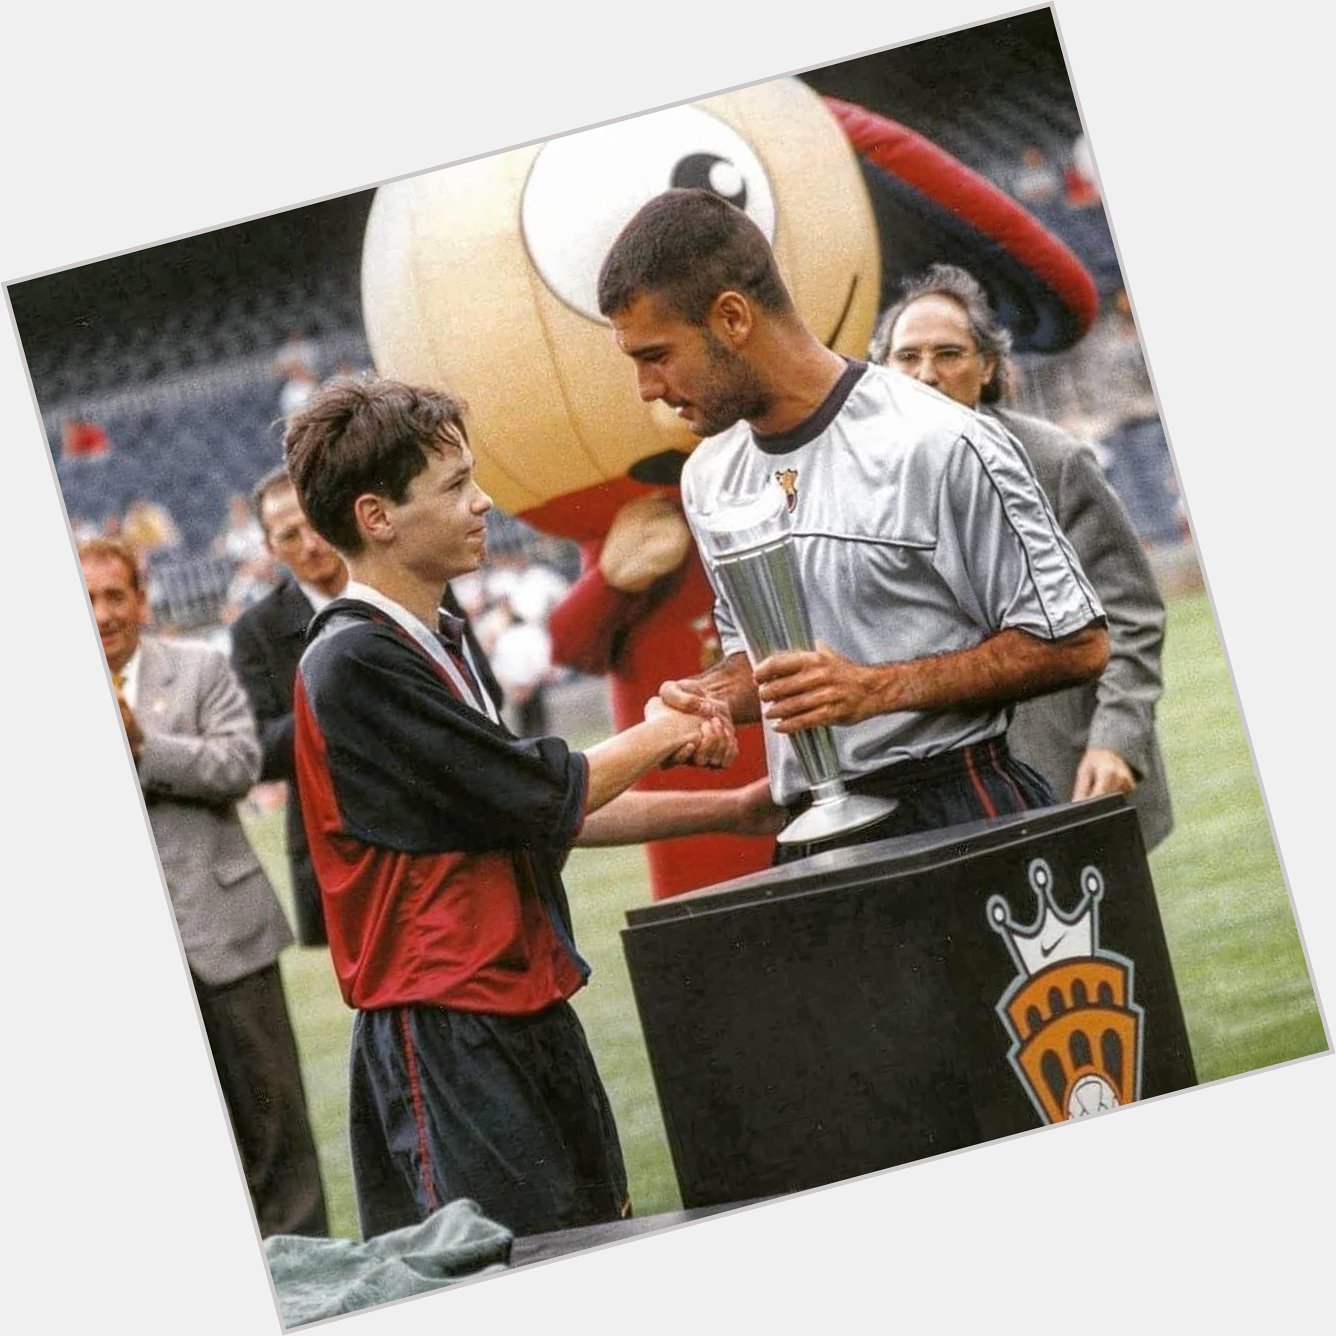 A teenager Andres Iniesta awarded by Pep Guardiola in 1999.

Happy Birthday Barcelona Legend 